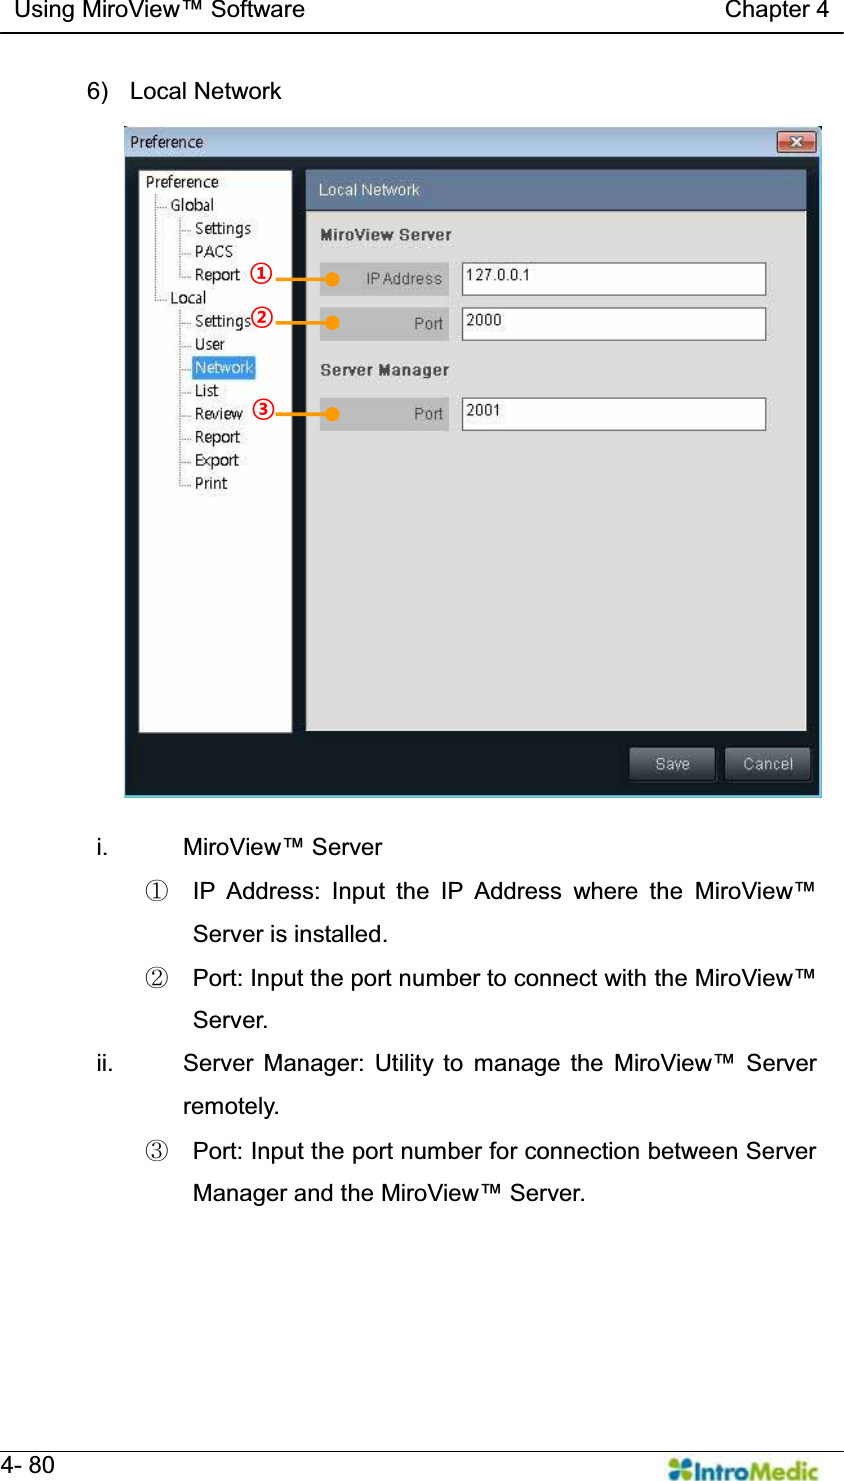   Using MiroView Software                                   Chapter 4   4- 80 6) Local Network  i.  0LUR9LHZServer ཛ  IP Address: Input the IP Address where the 0LUR9LHZServer is installed. ཛྷ  Port: Input the port number to connect with the 0LUR9LHZServer. ii. Server Manager: Utility to manage the 0LUR9LHZ Server remotely. ཝ Port: Input the port number for connection between Server Manager and the 0LUR9LHZServer. ¤ ¢ £ ¢ £ ¤ 